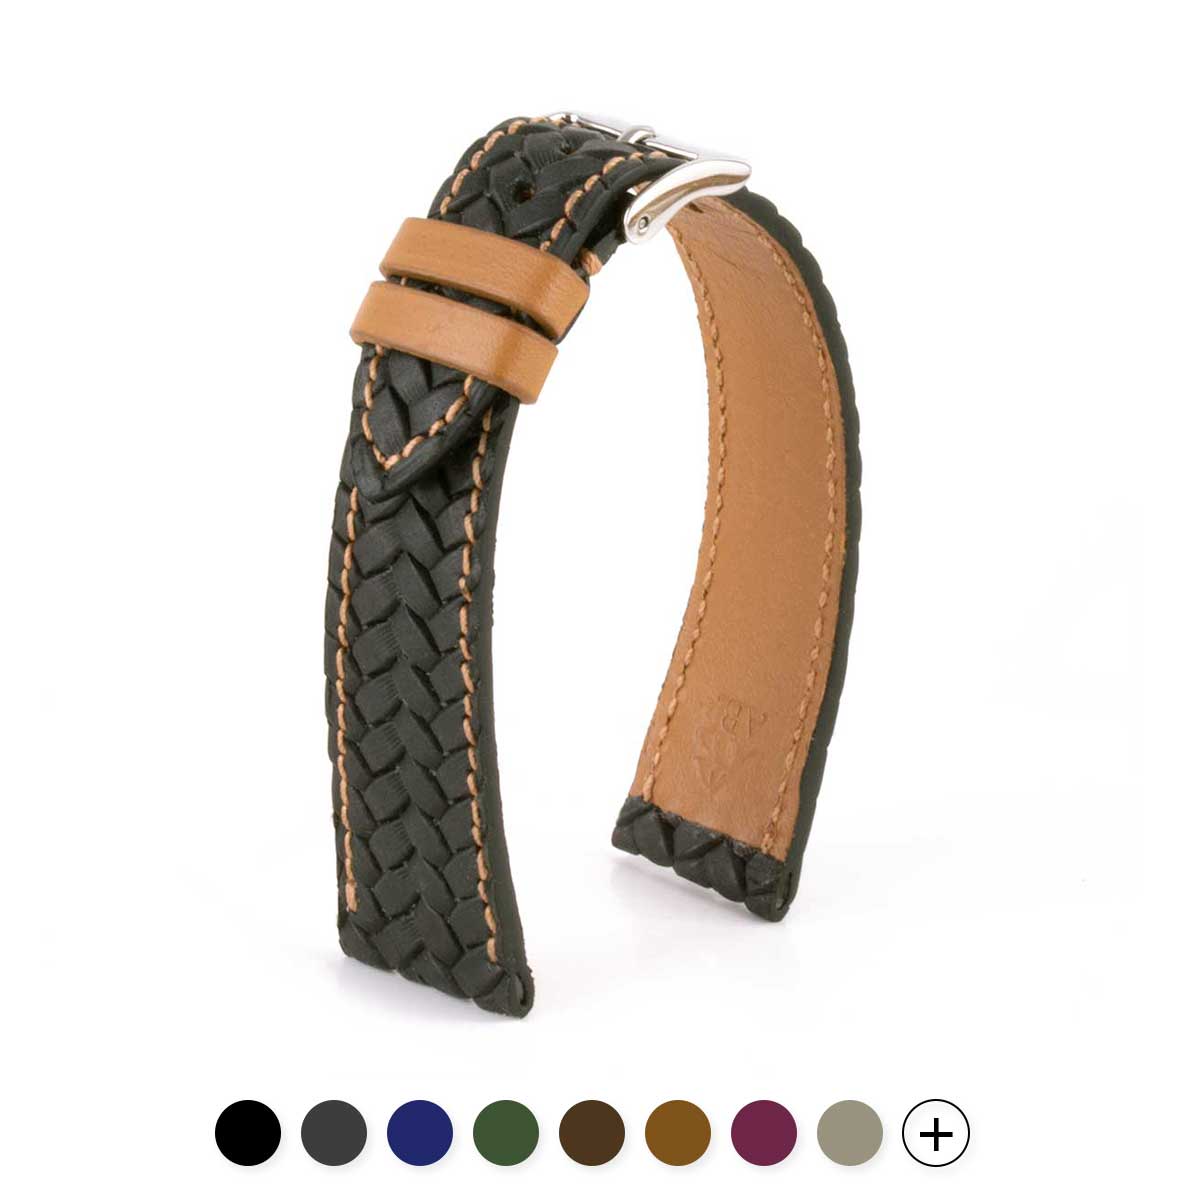 Leather watch-band - Braided calf strap (black, grey, blue, brown...)